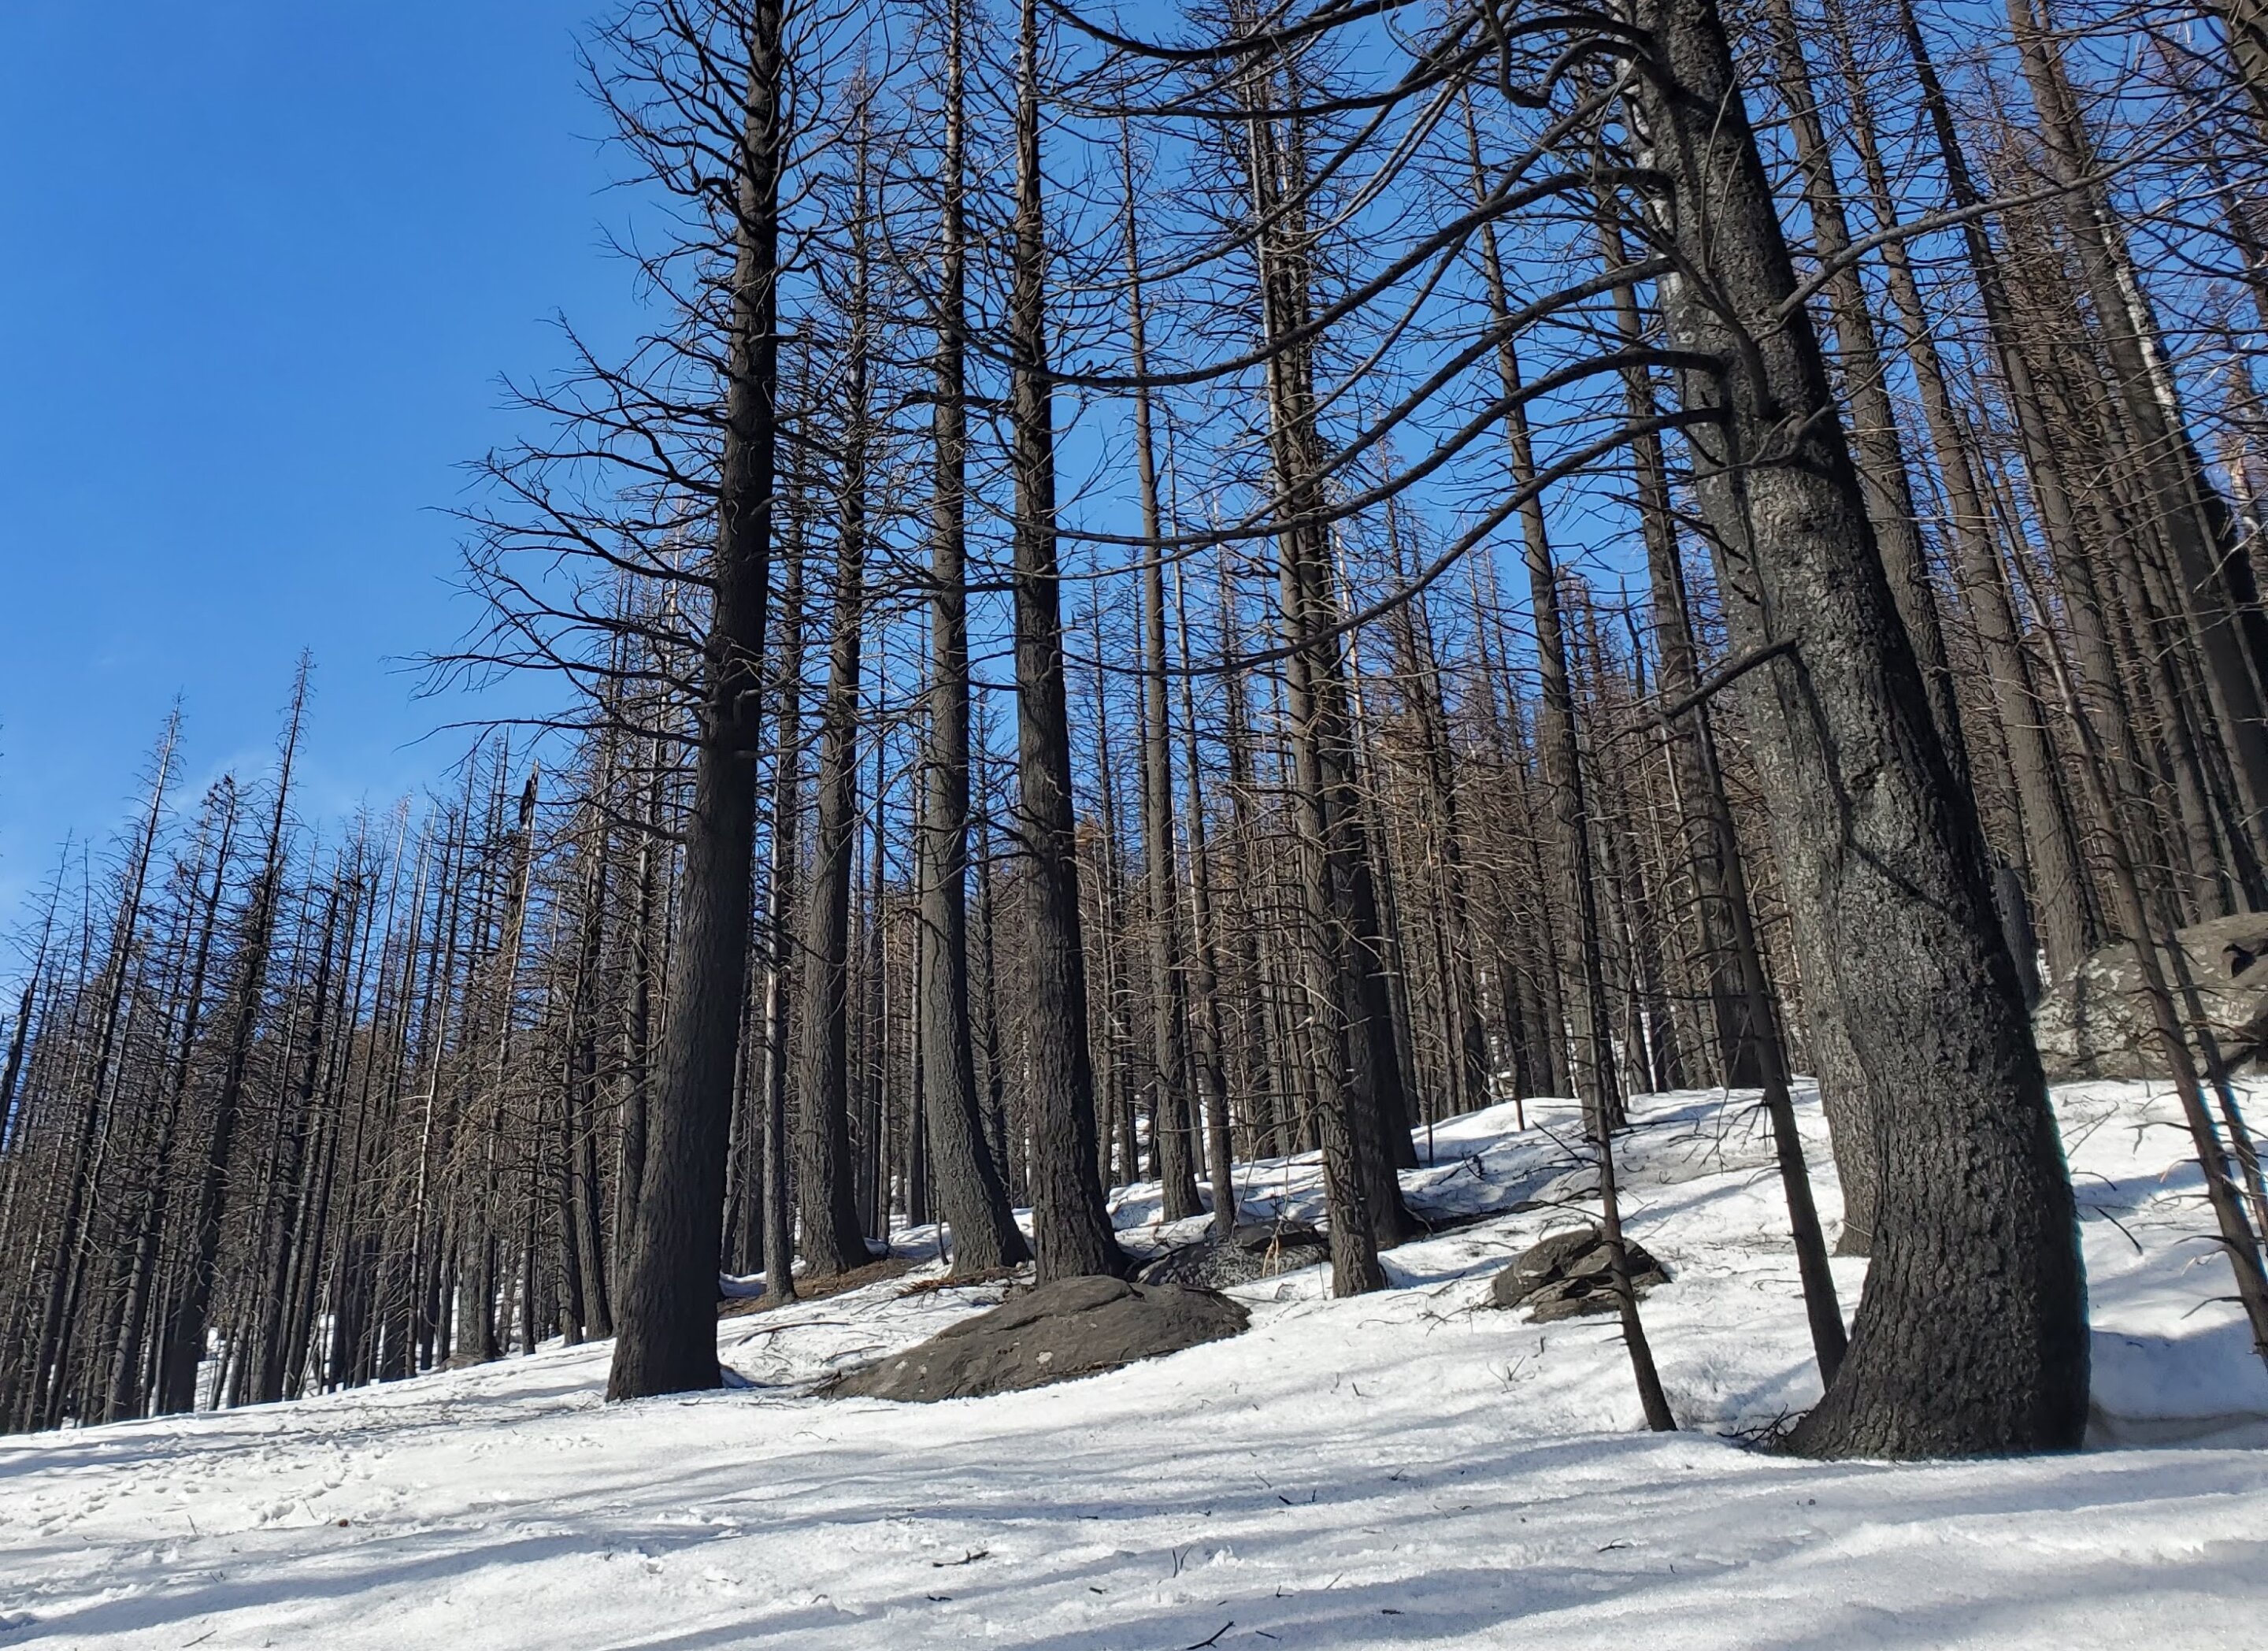 Wildfires are increasingly burning California’s snowy landscapes, colliding with winter droughts to shrink snowpack